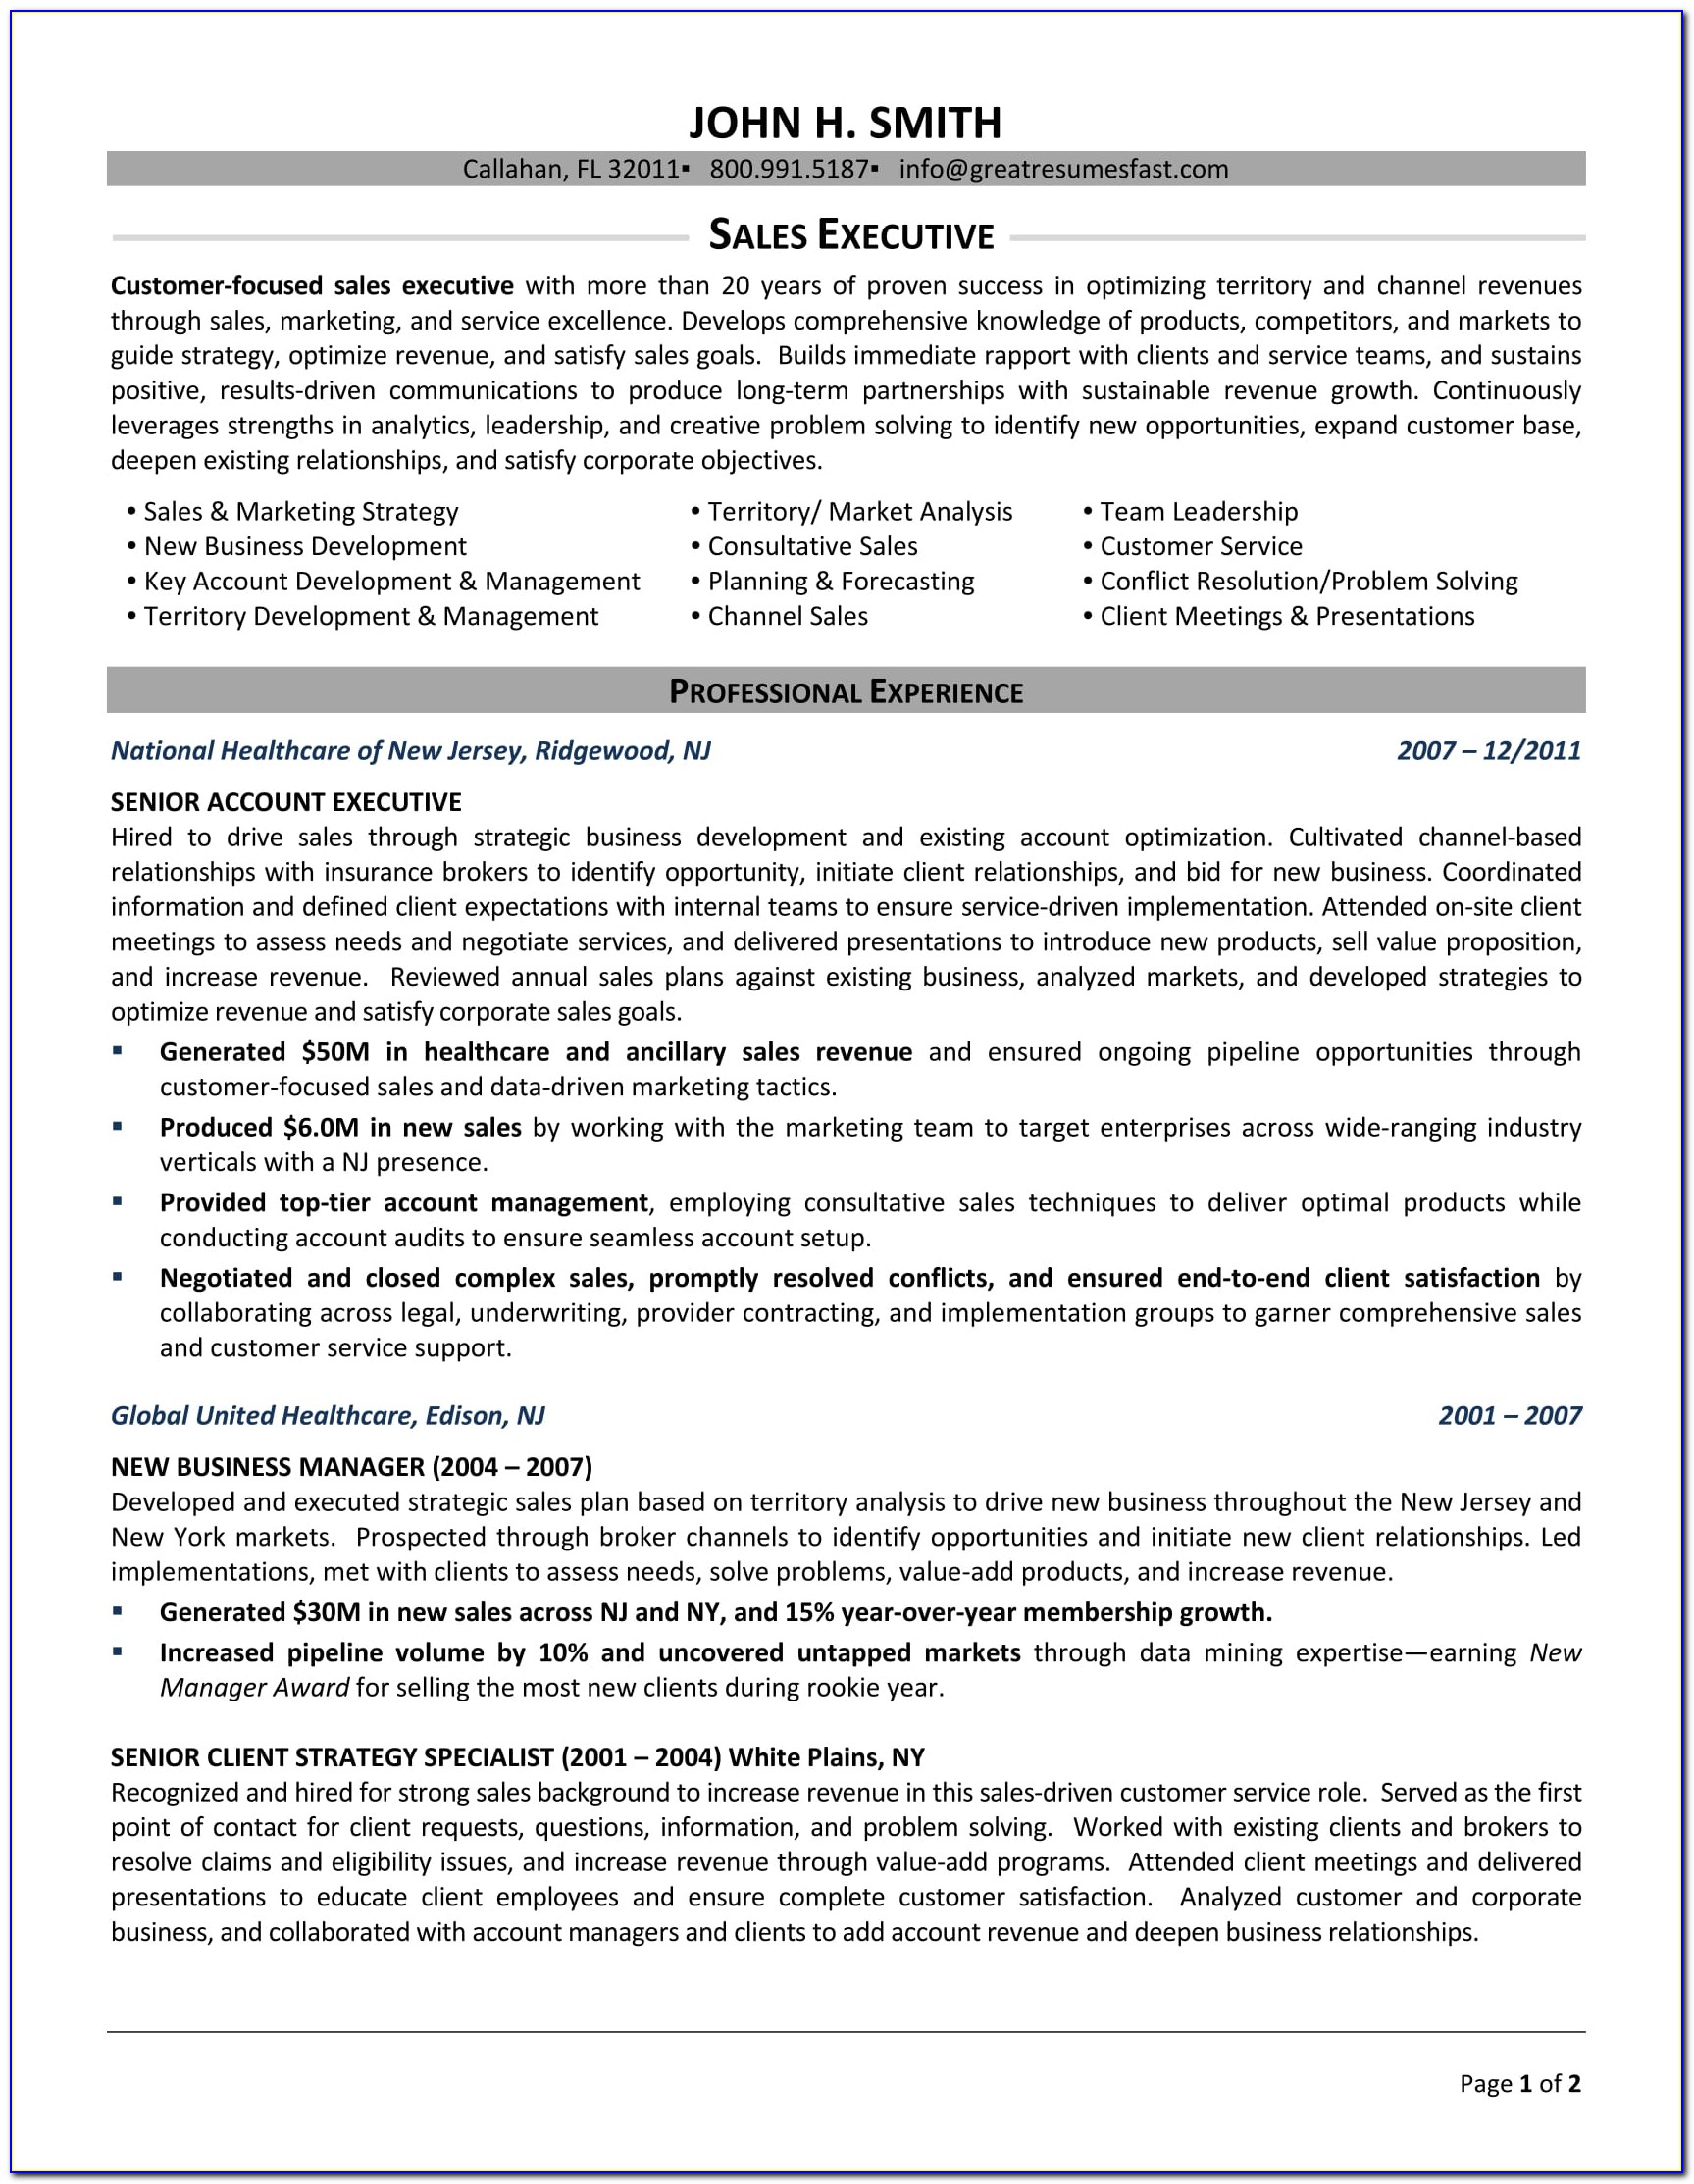 Sample Resume For Sales Manager